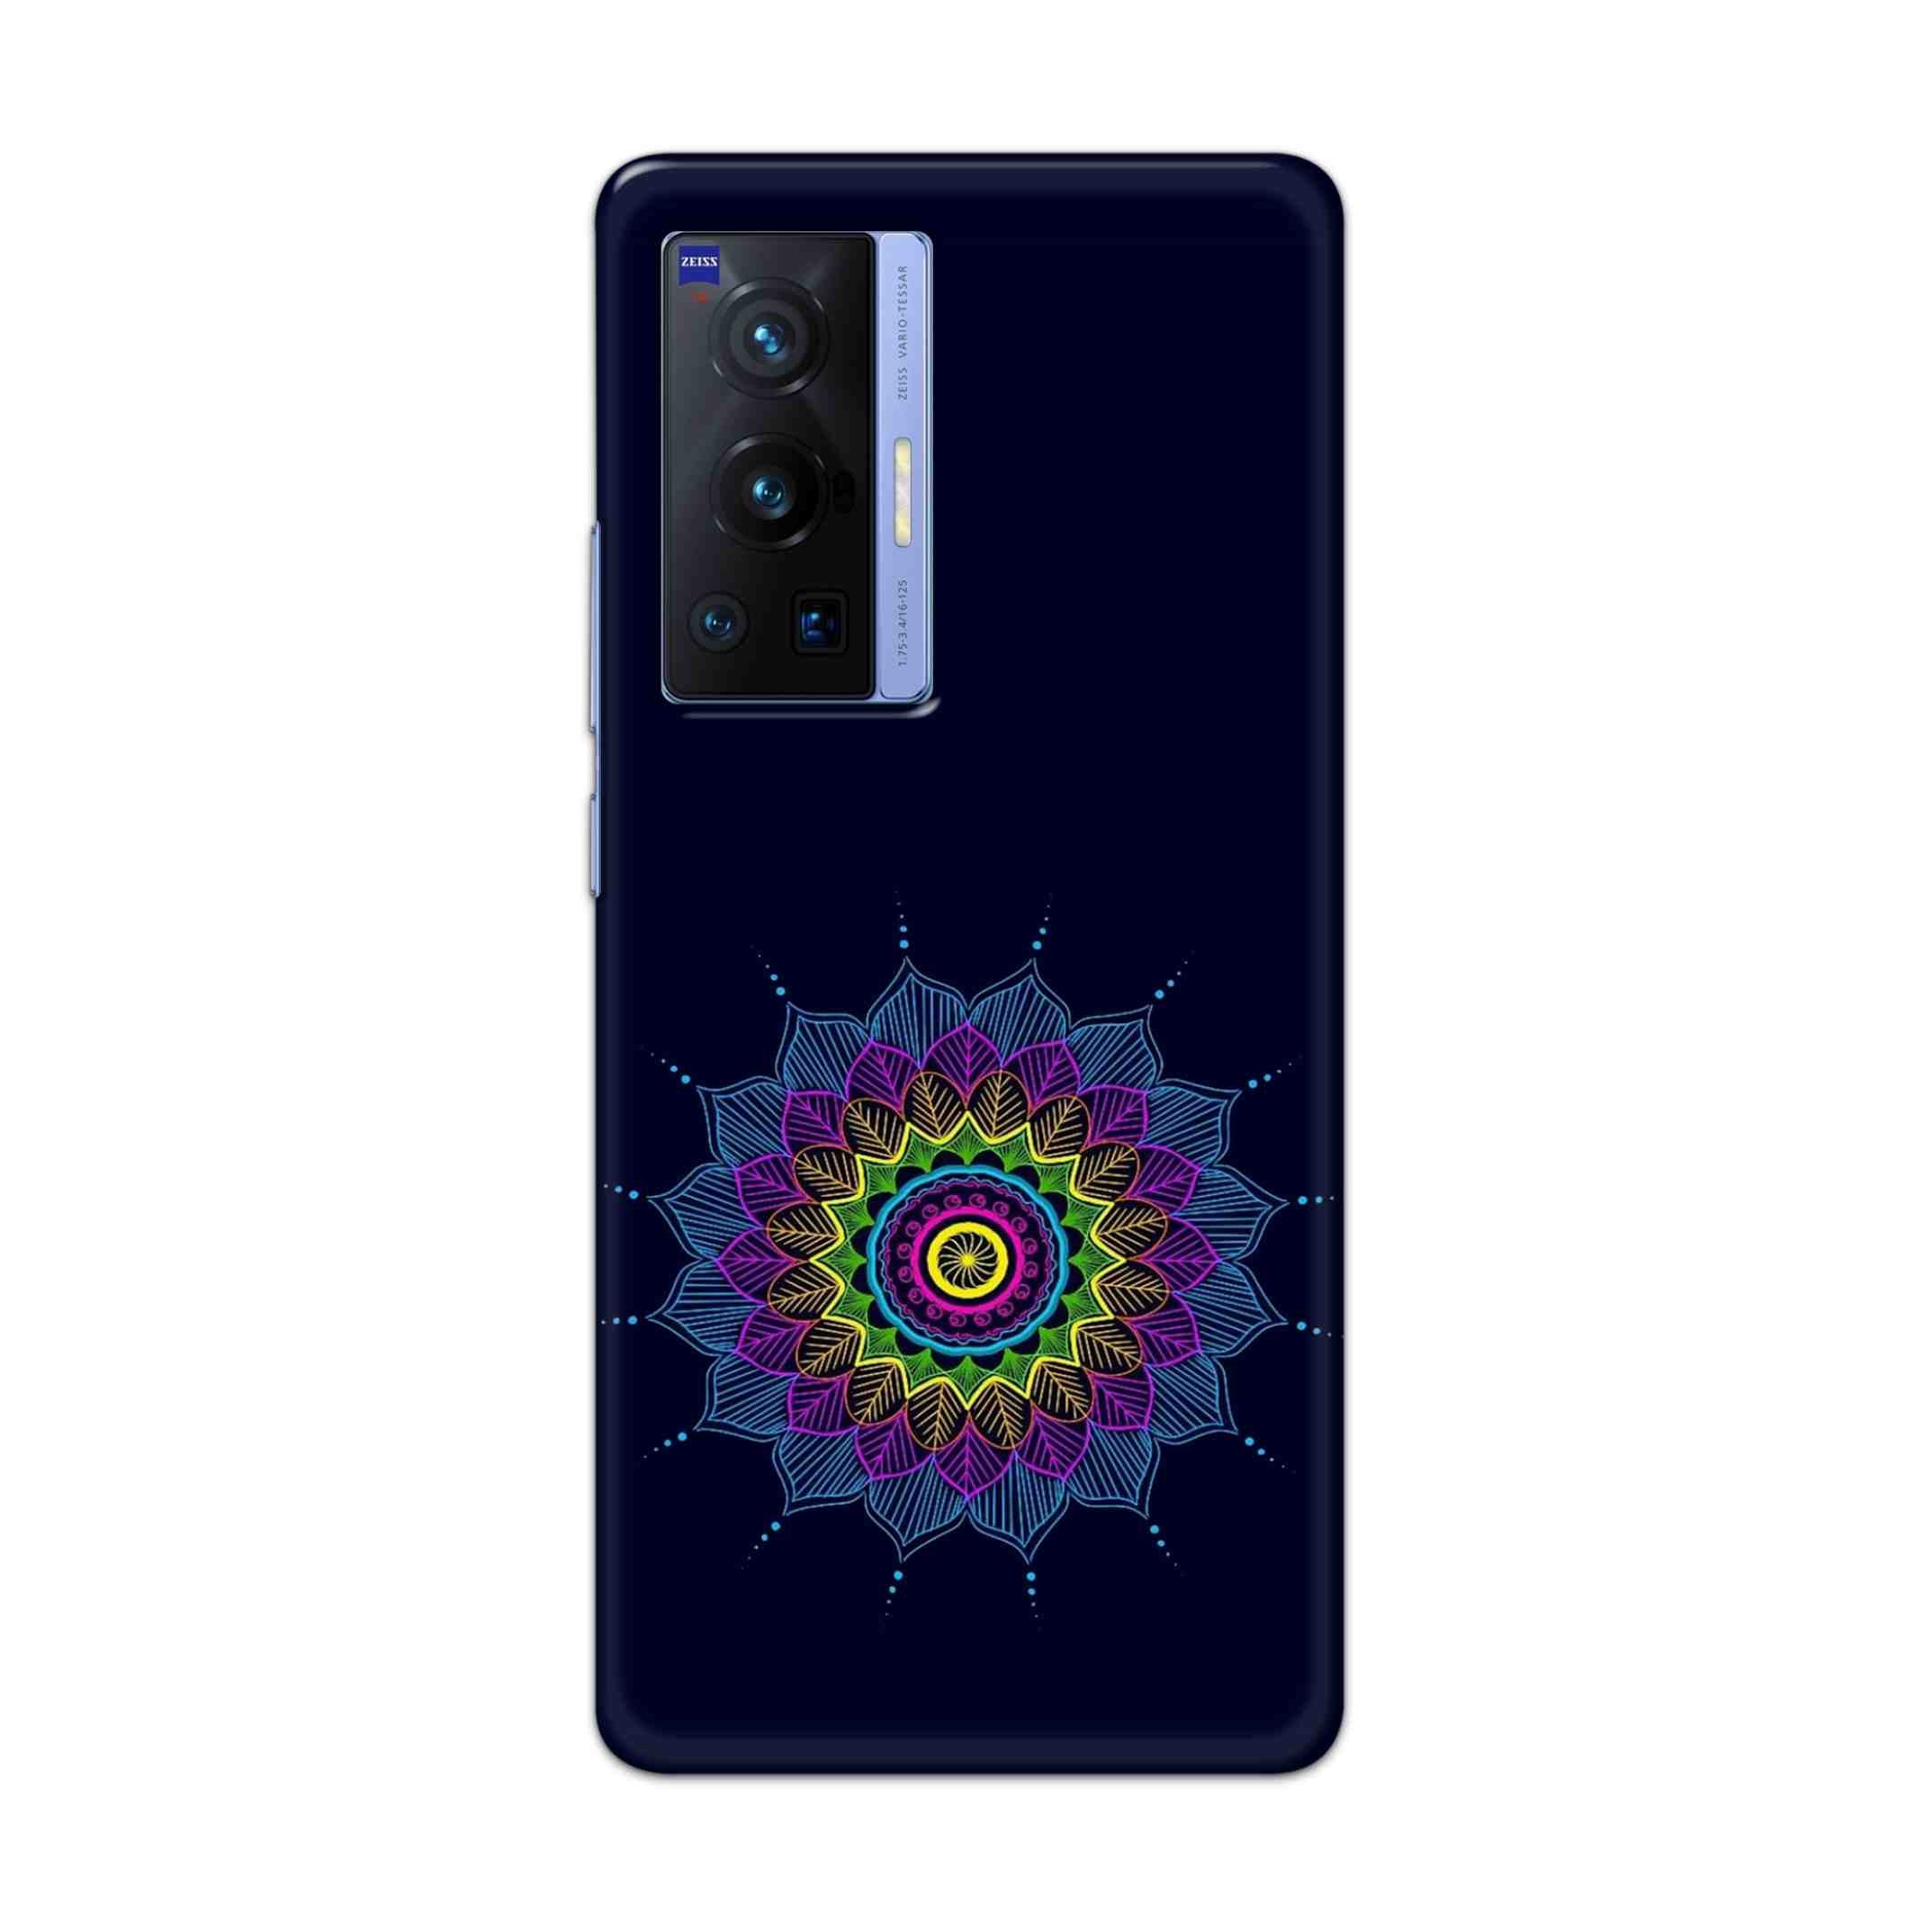 Buy Jung And Mandalas Hard Back Mobile Phone Case Cover For Vivo X70 Pro Online